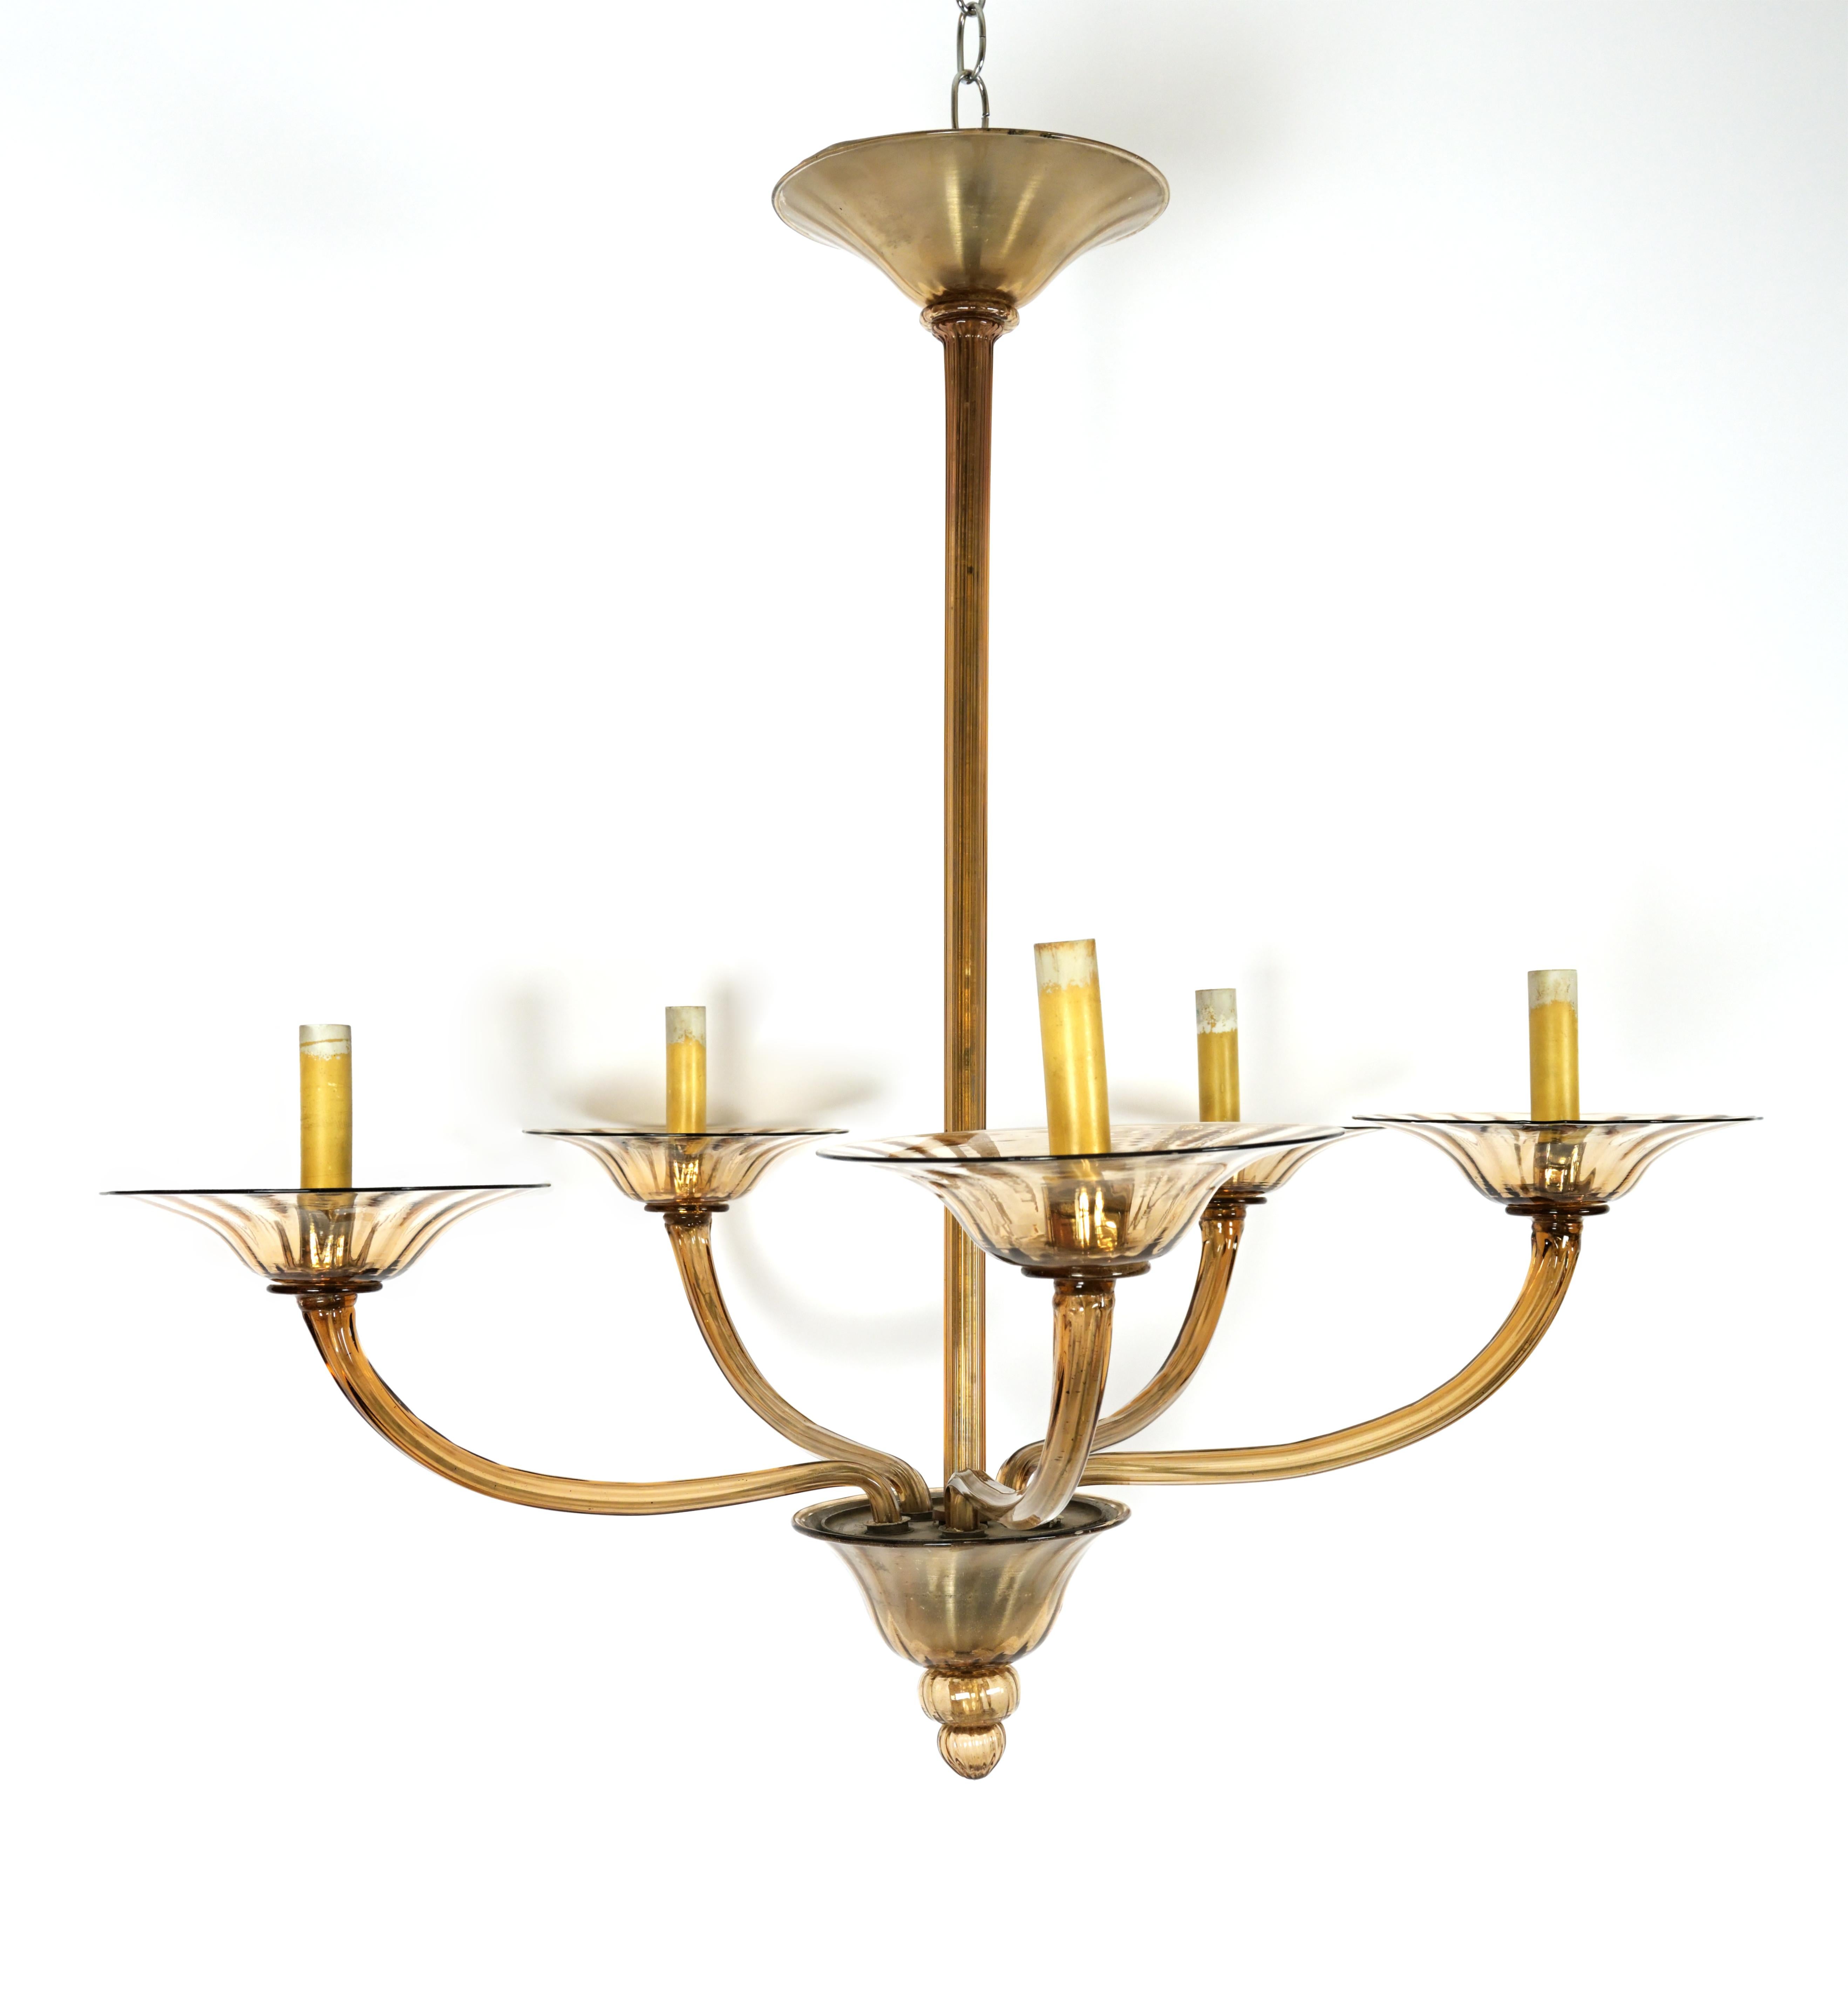 An Italian hand blown smokey amber Murano glass chandelier with five arms issuing from the hand blown dish center below a stem with cylindrical glass elements covering the stem. Each arm having bowl with glass drop on underside.

Please note, the